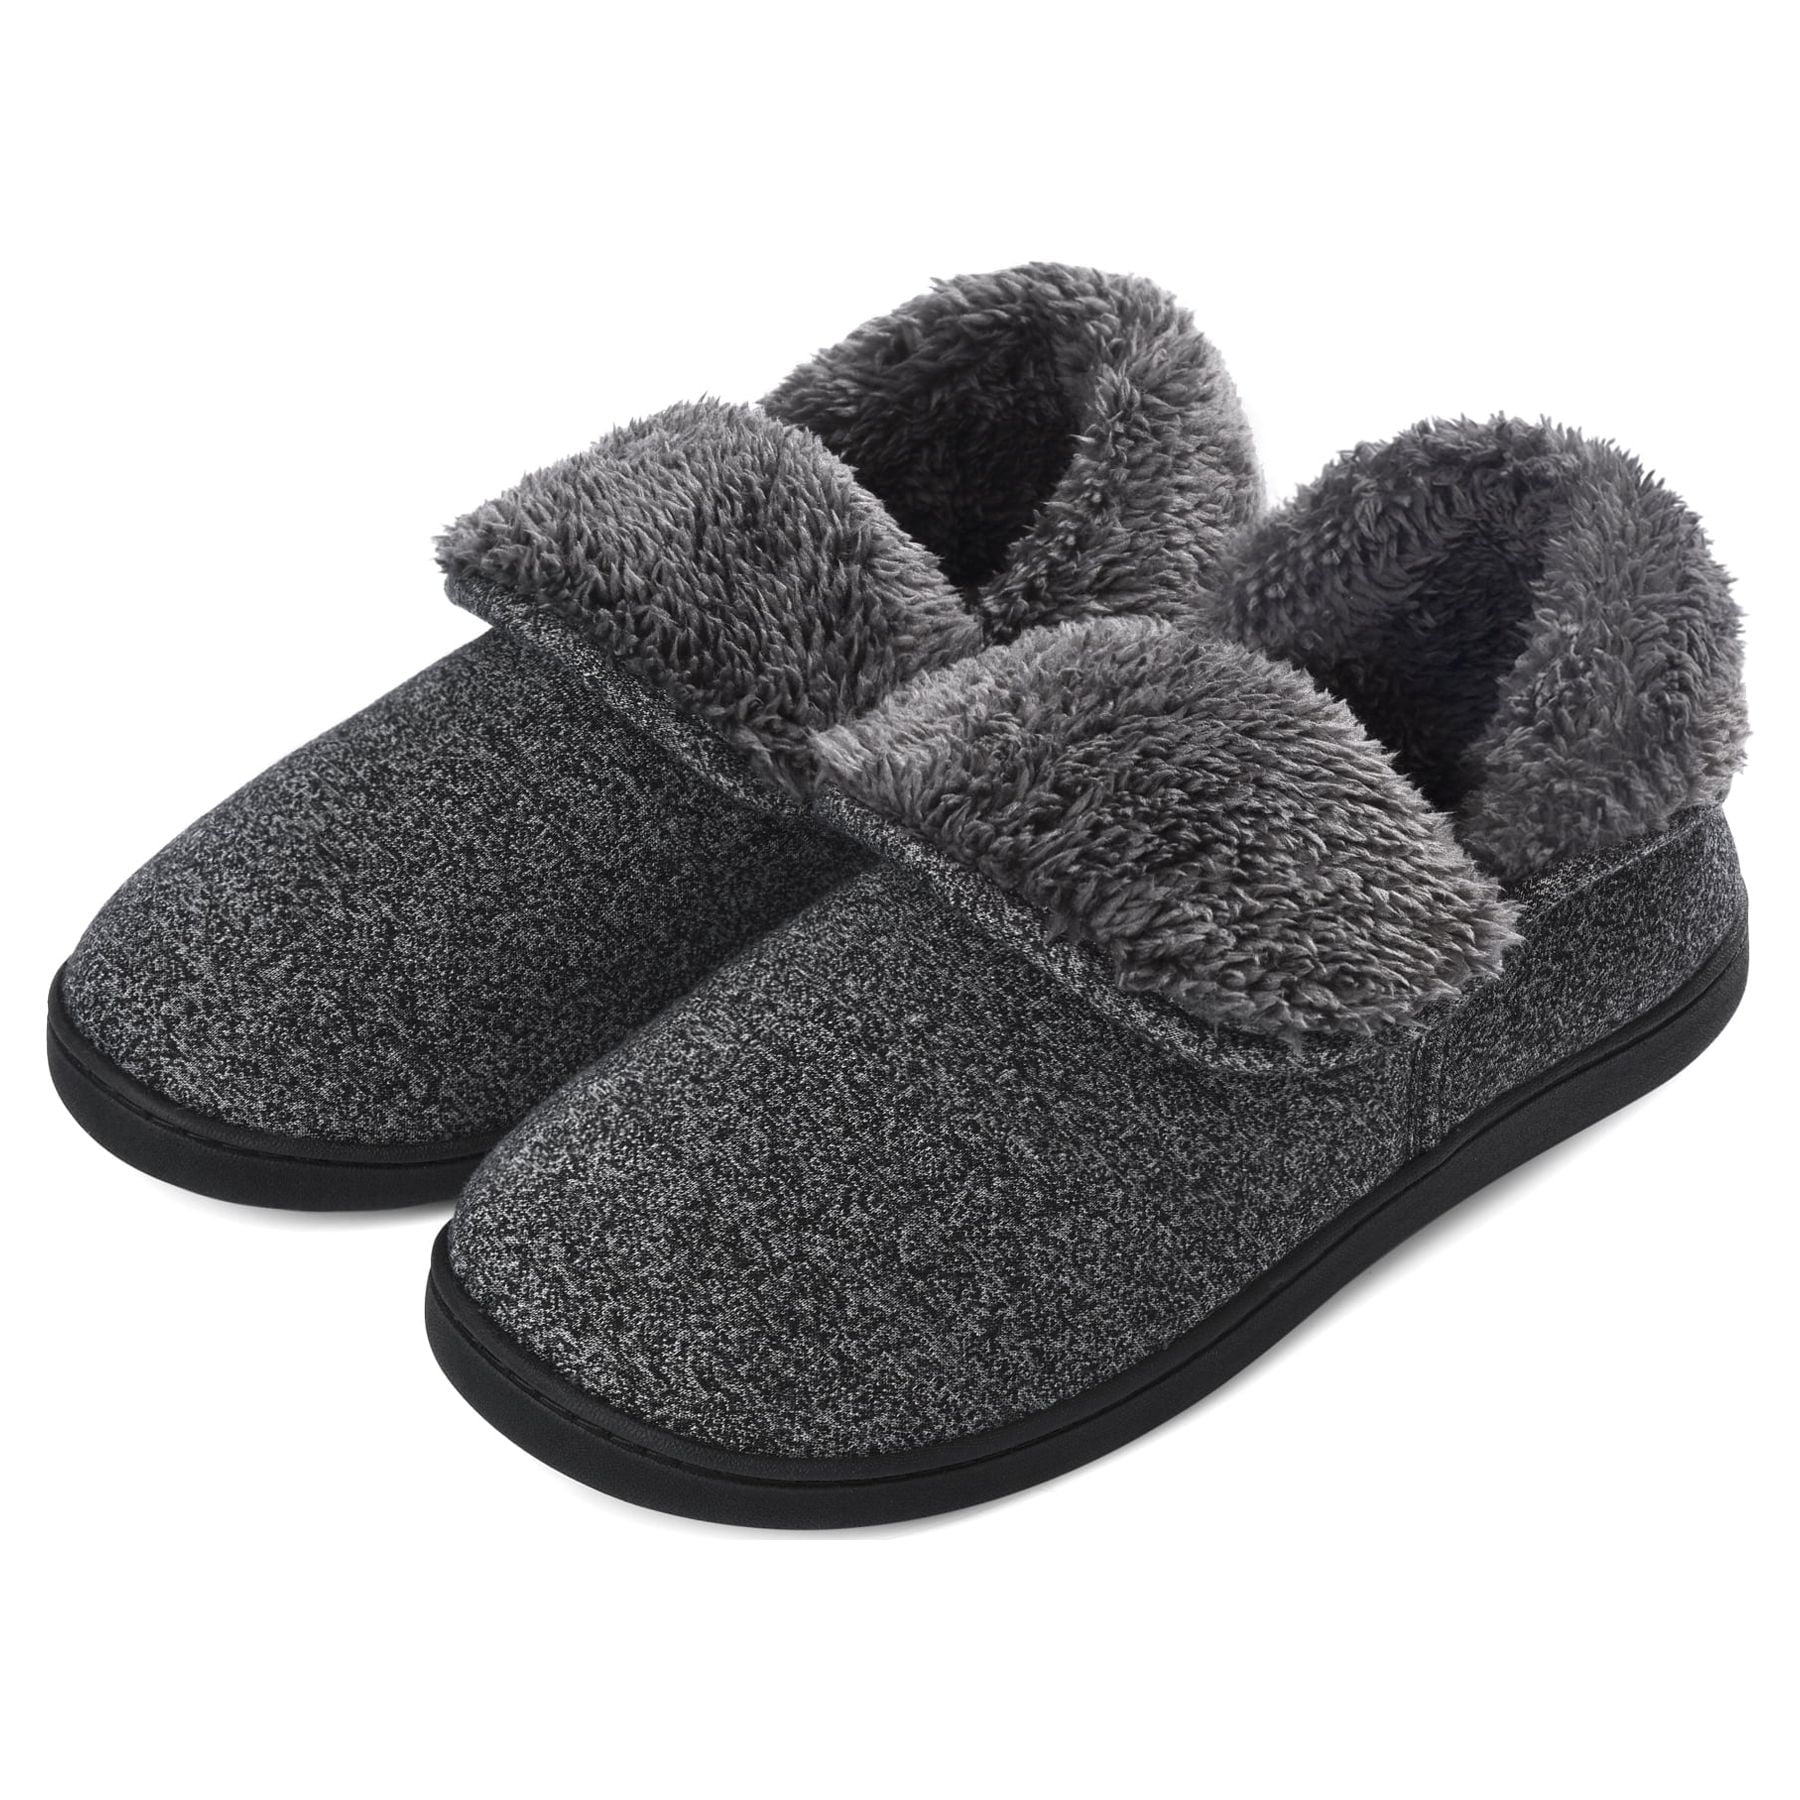 VONMAY Men's Fuzzy Slippers Boots Memory Foam Booties Comfy House Shoes ...